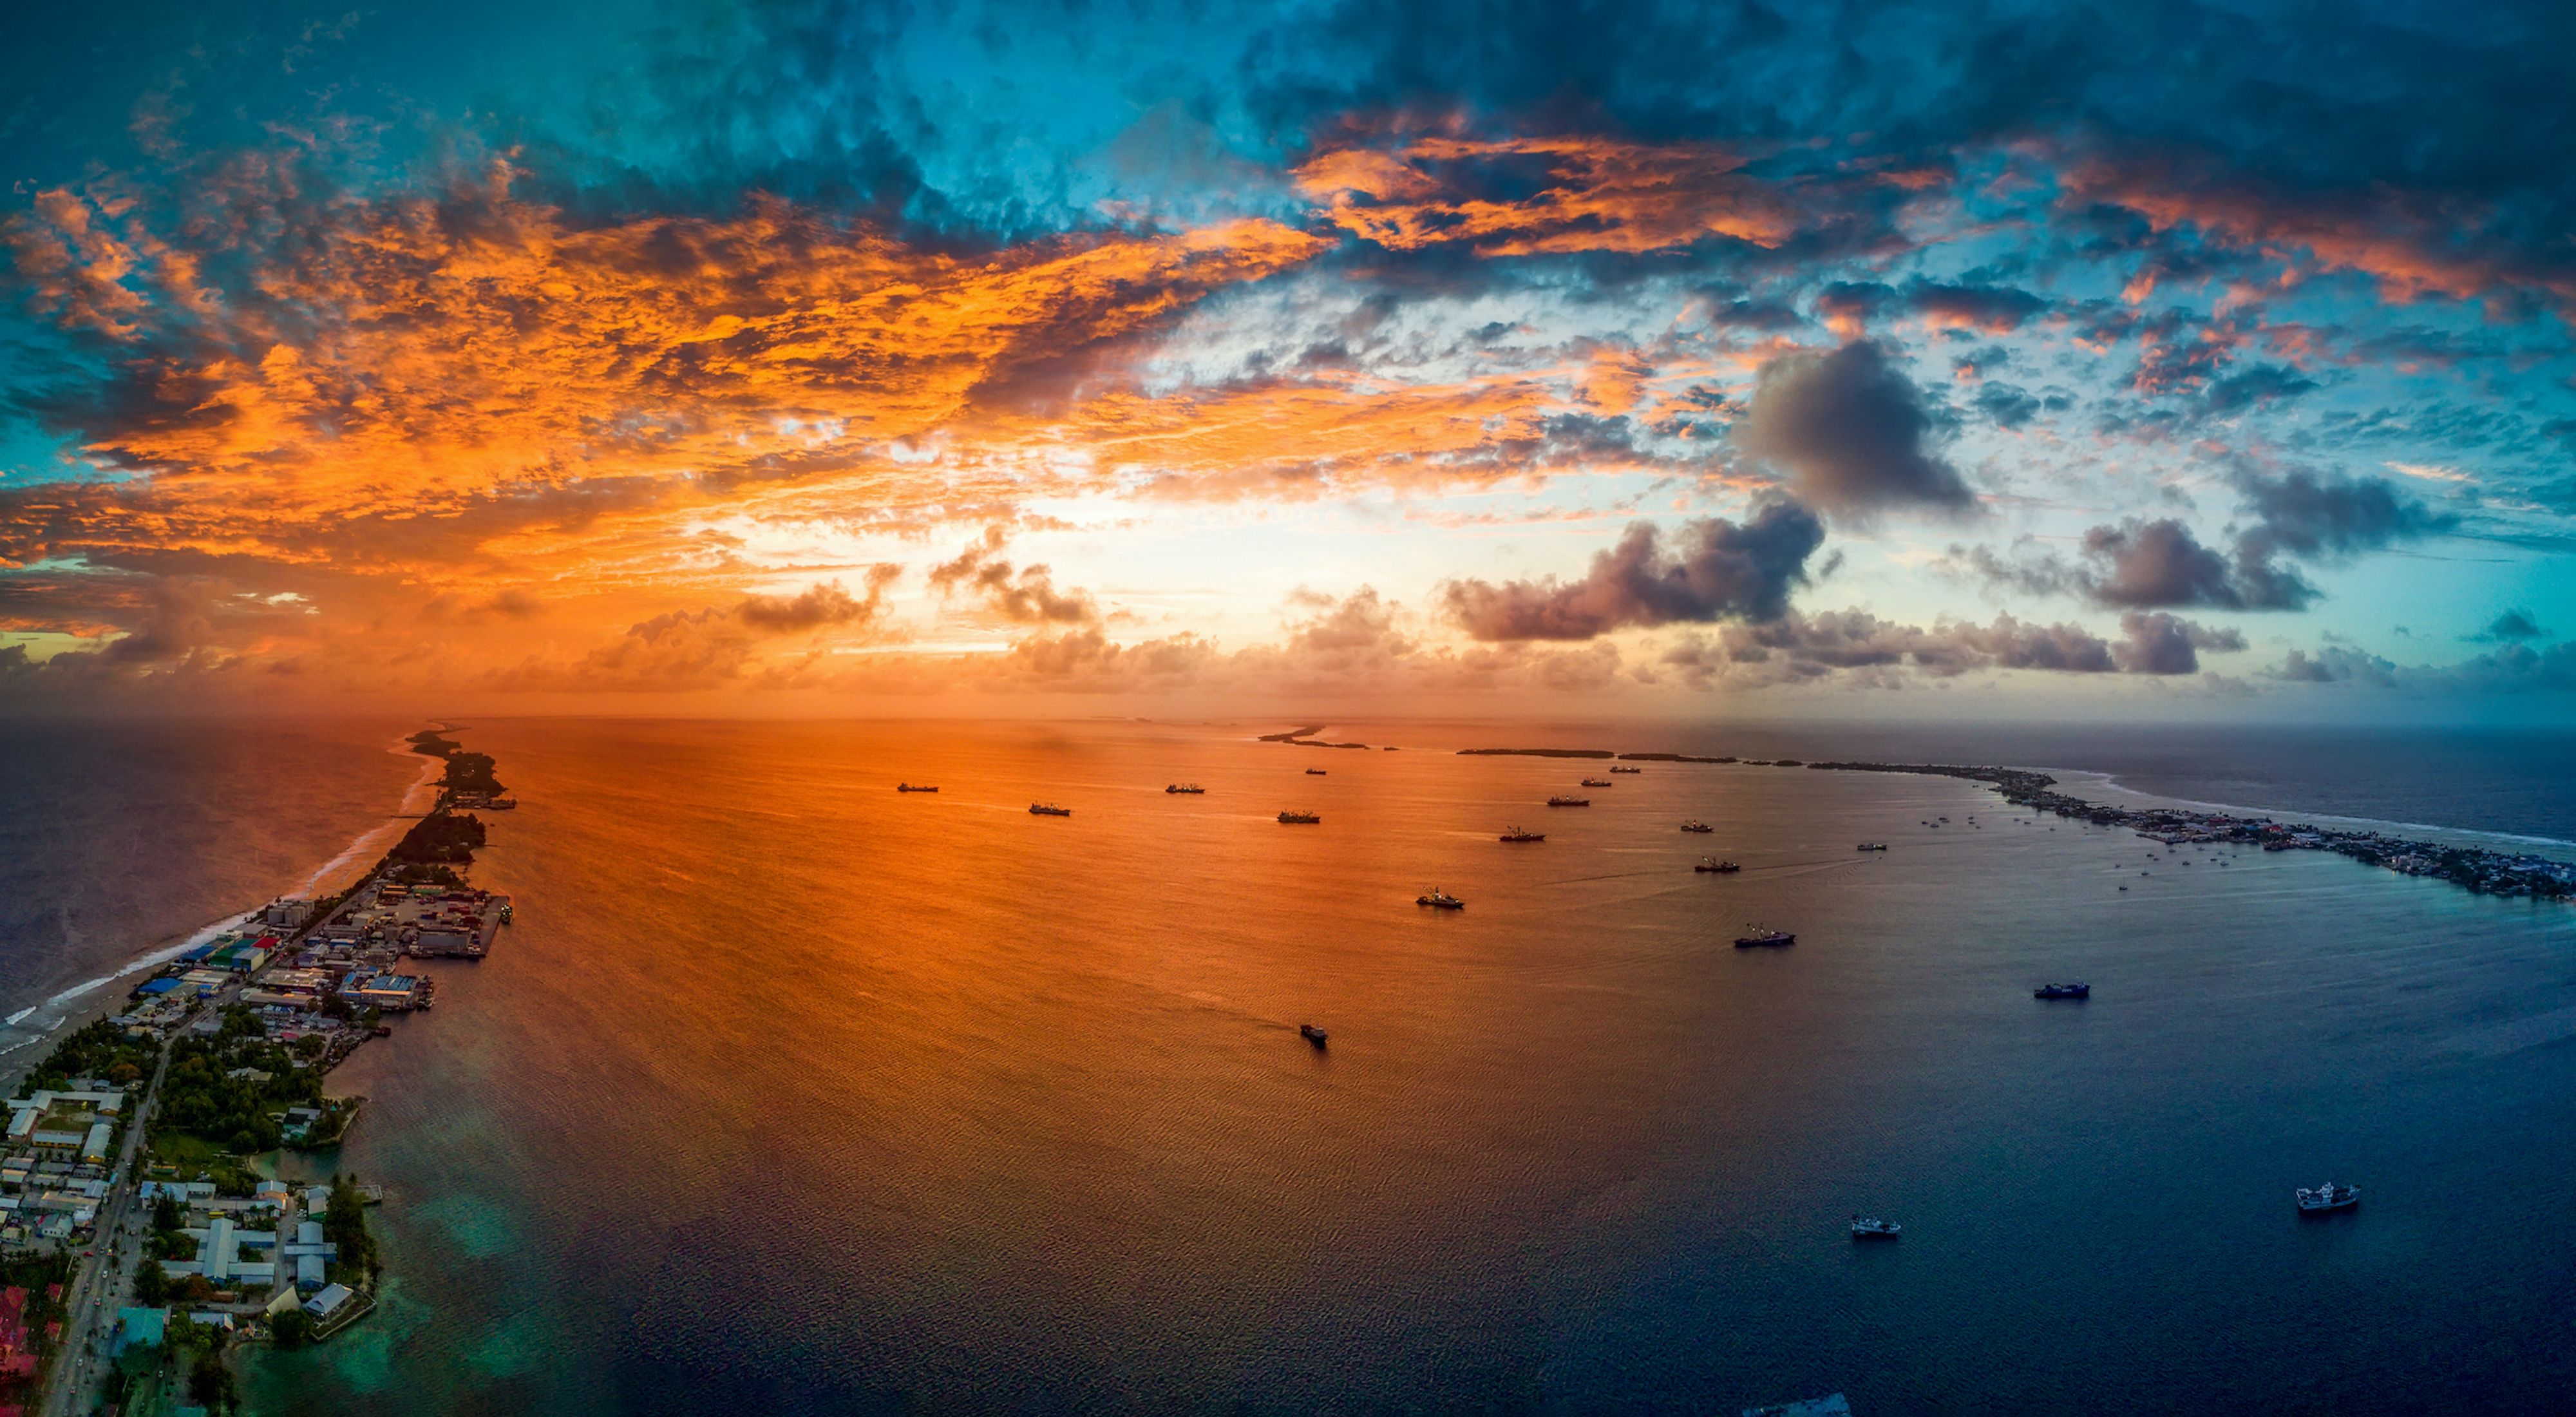 Fishing vessels in the Marshall Islands at sunset.